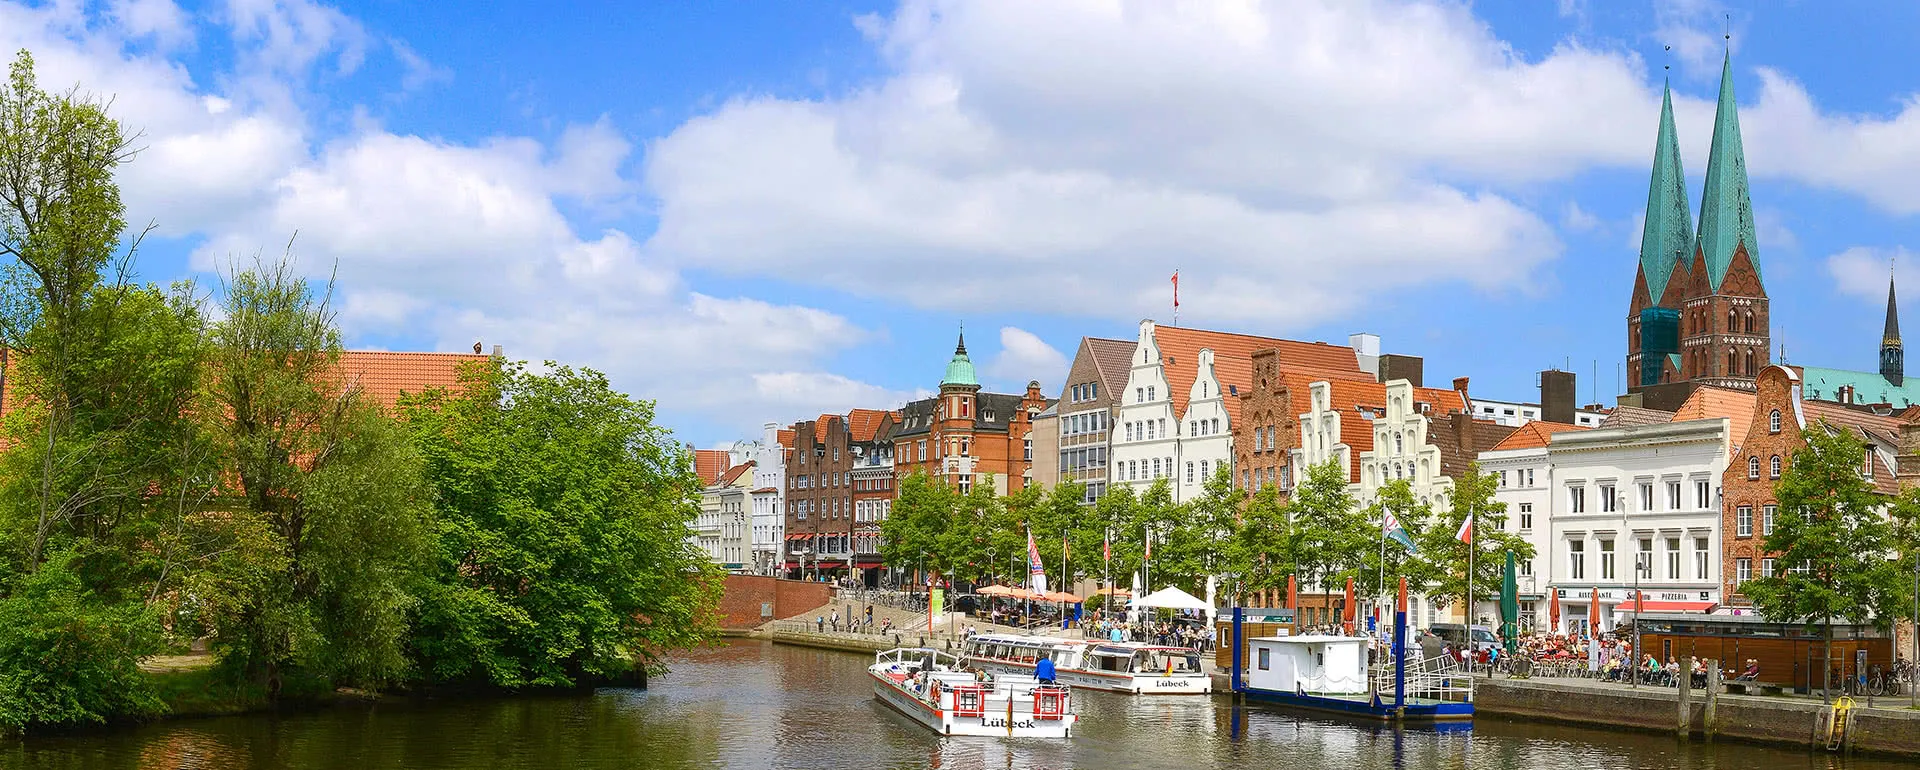 Luebeck - the destination for company trips